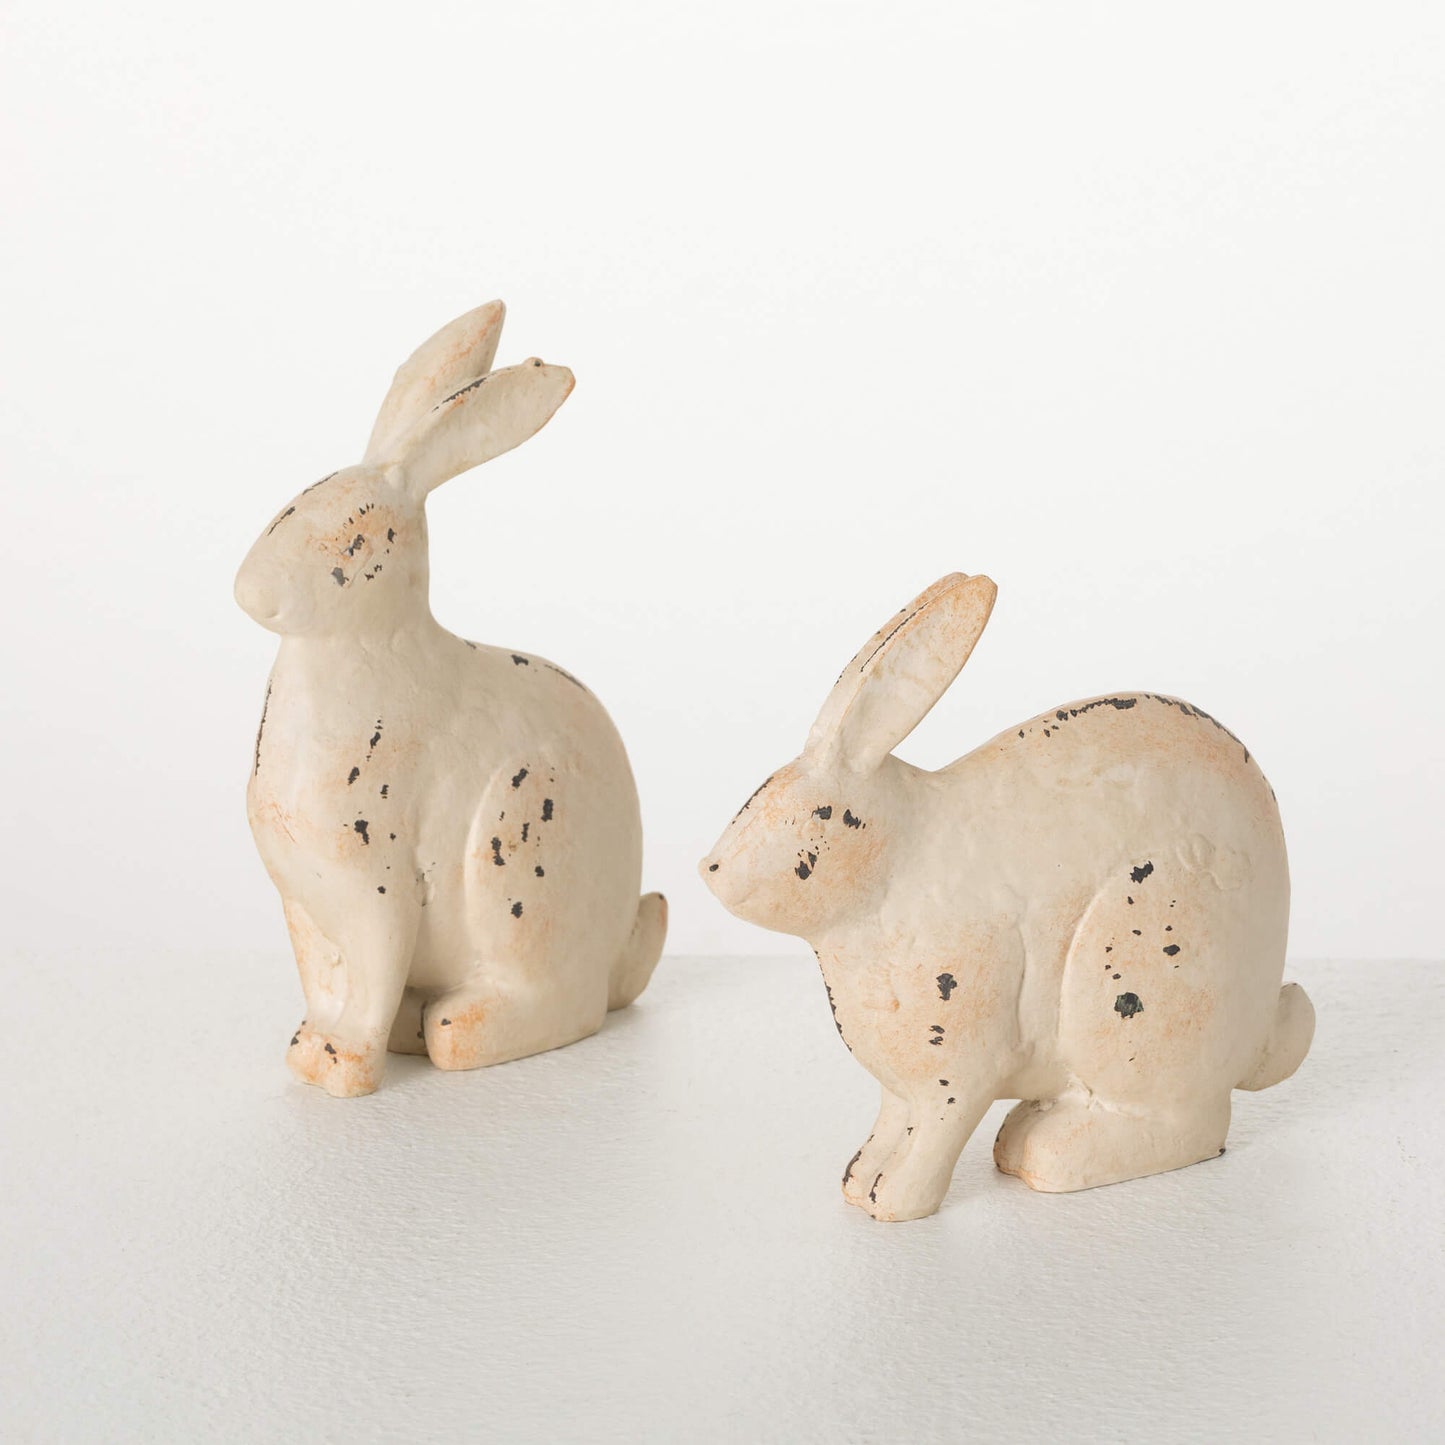 2 styles of Metal Bunny Figurines on a white background.